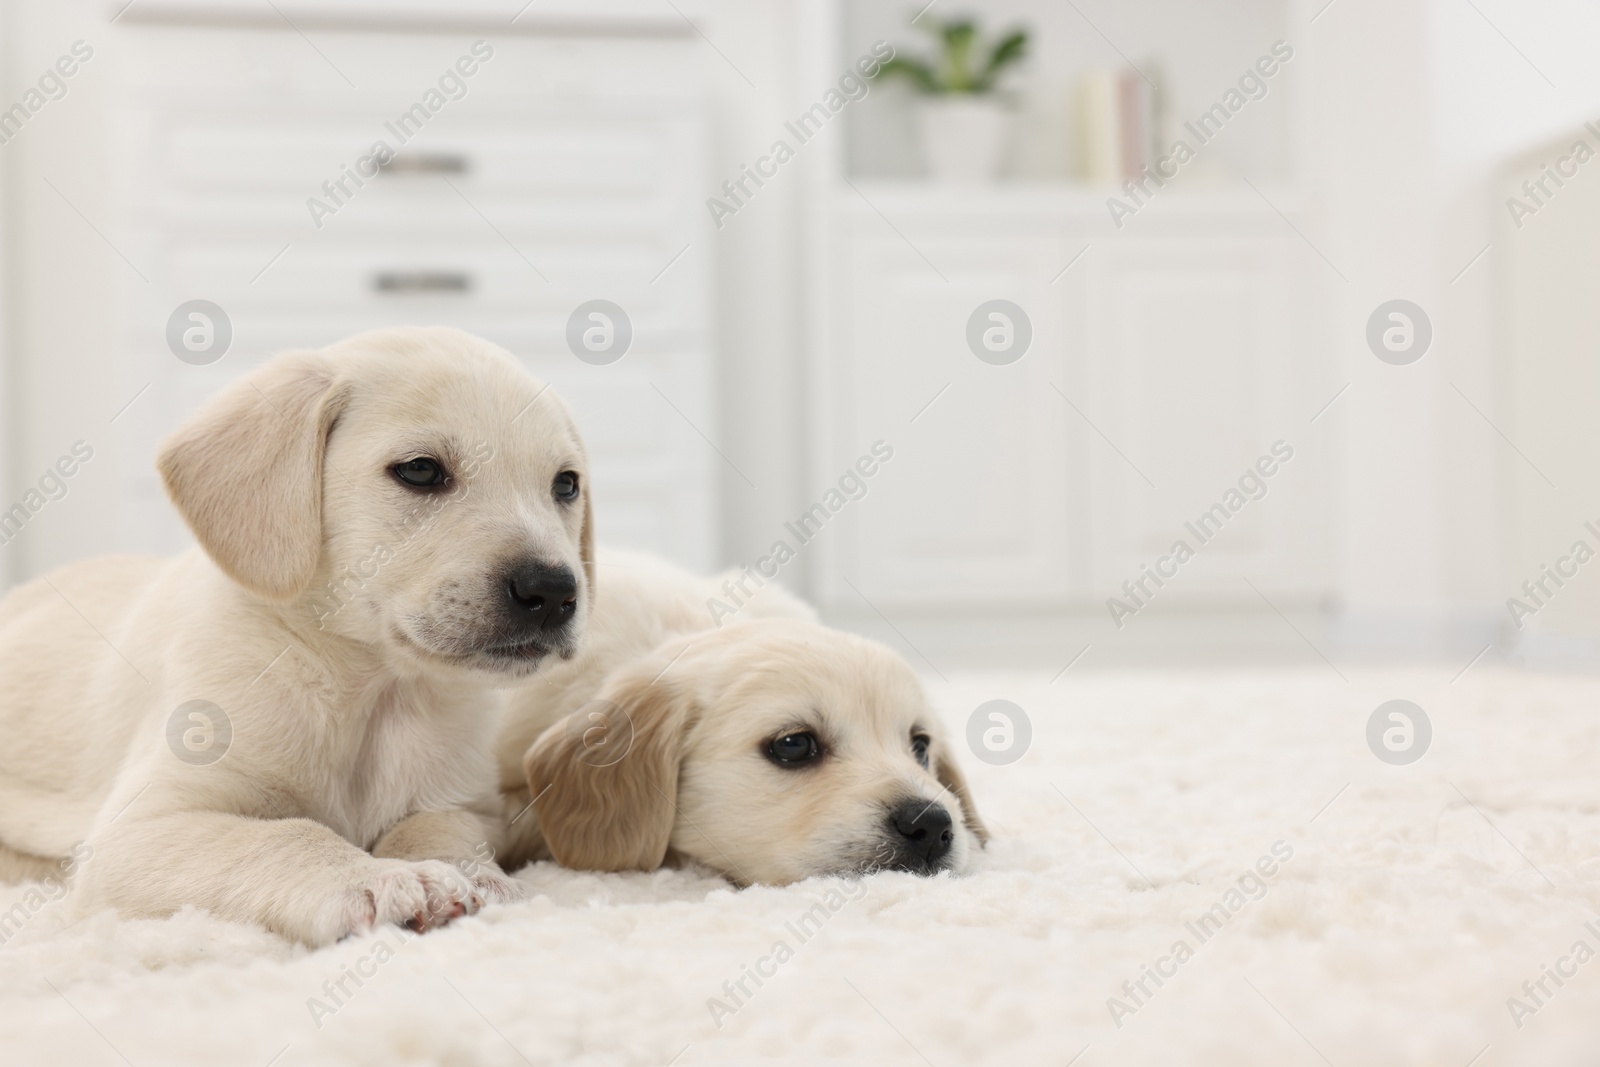 Photo of Cute little puppies on white carpet at home. Space for text